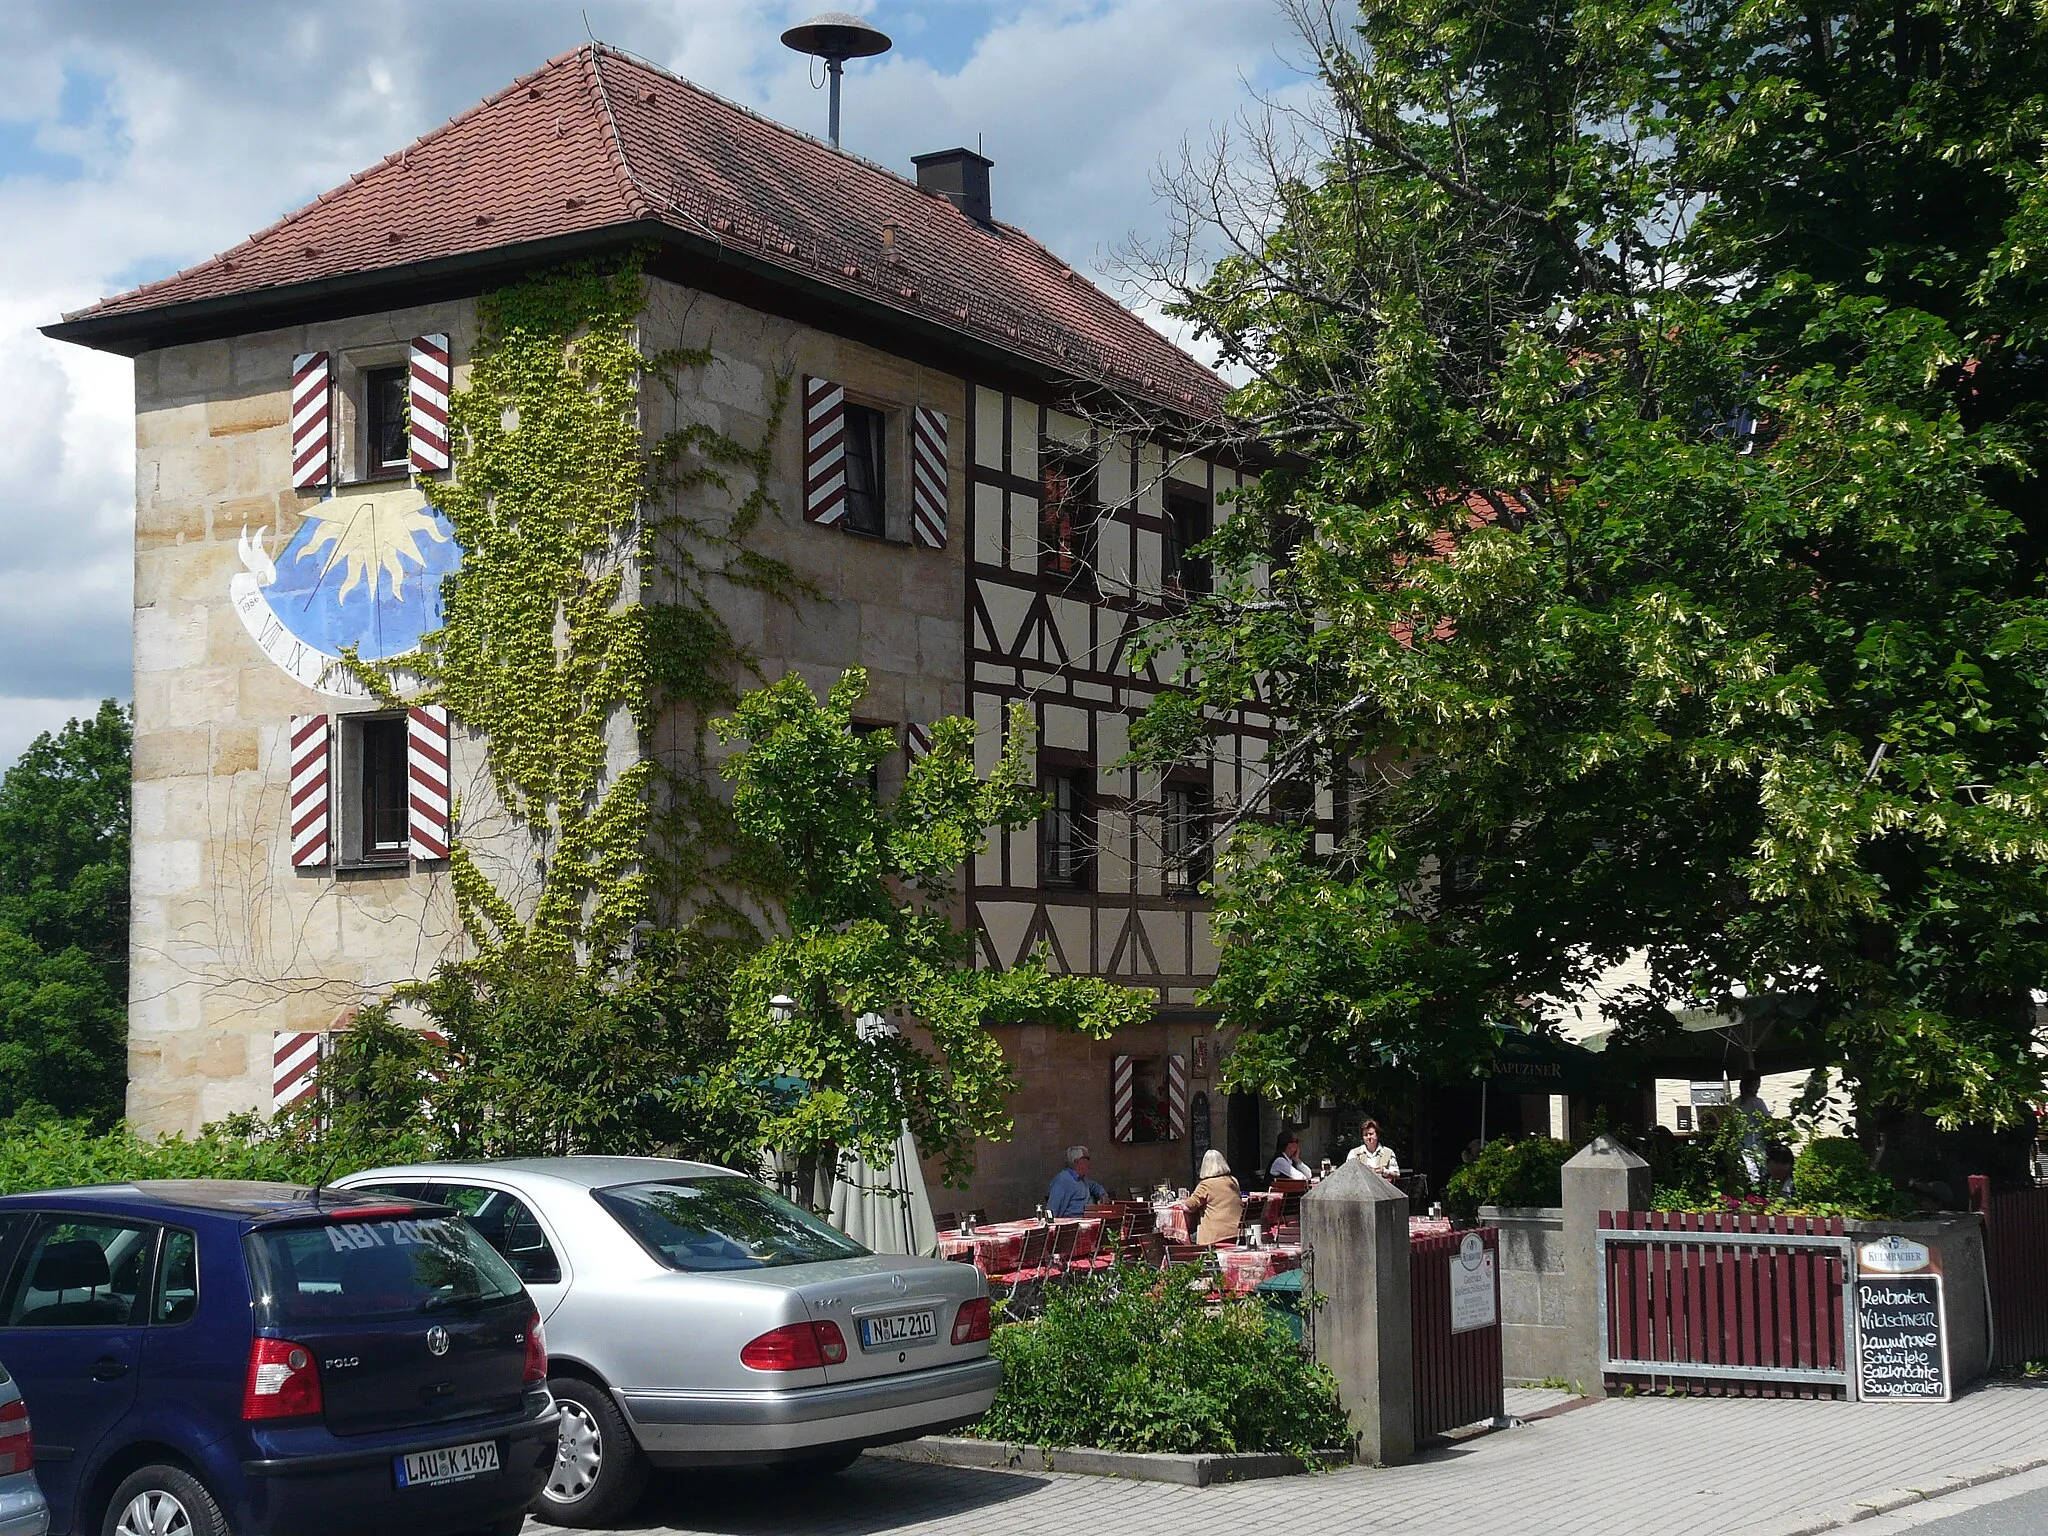 Photo showing: The hamlet Nuschelberg, a section of the town of Lauf an der Pegnitz